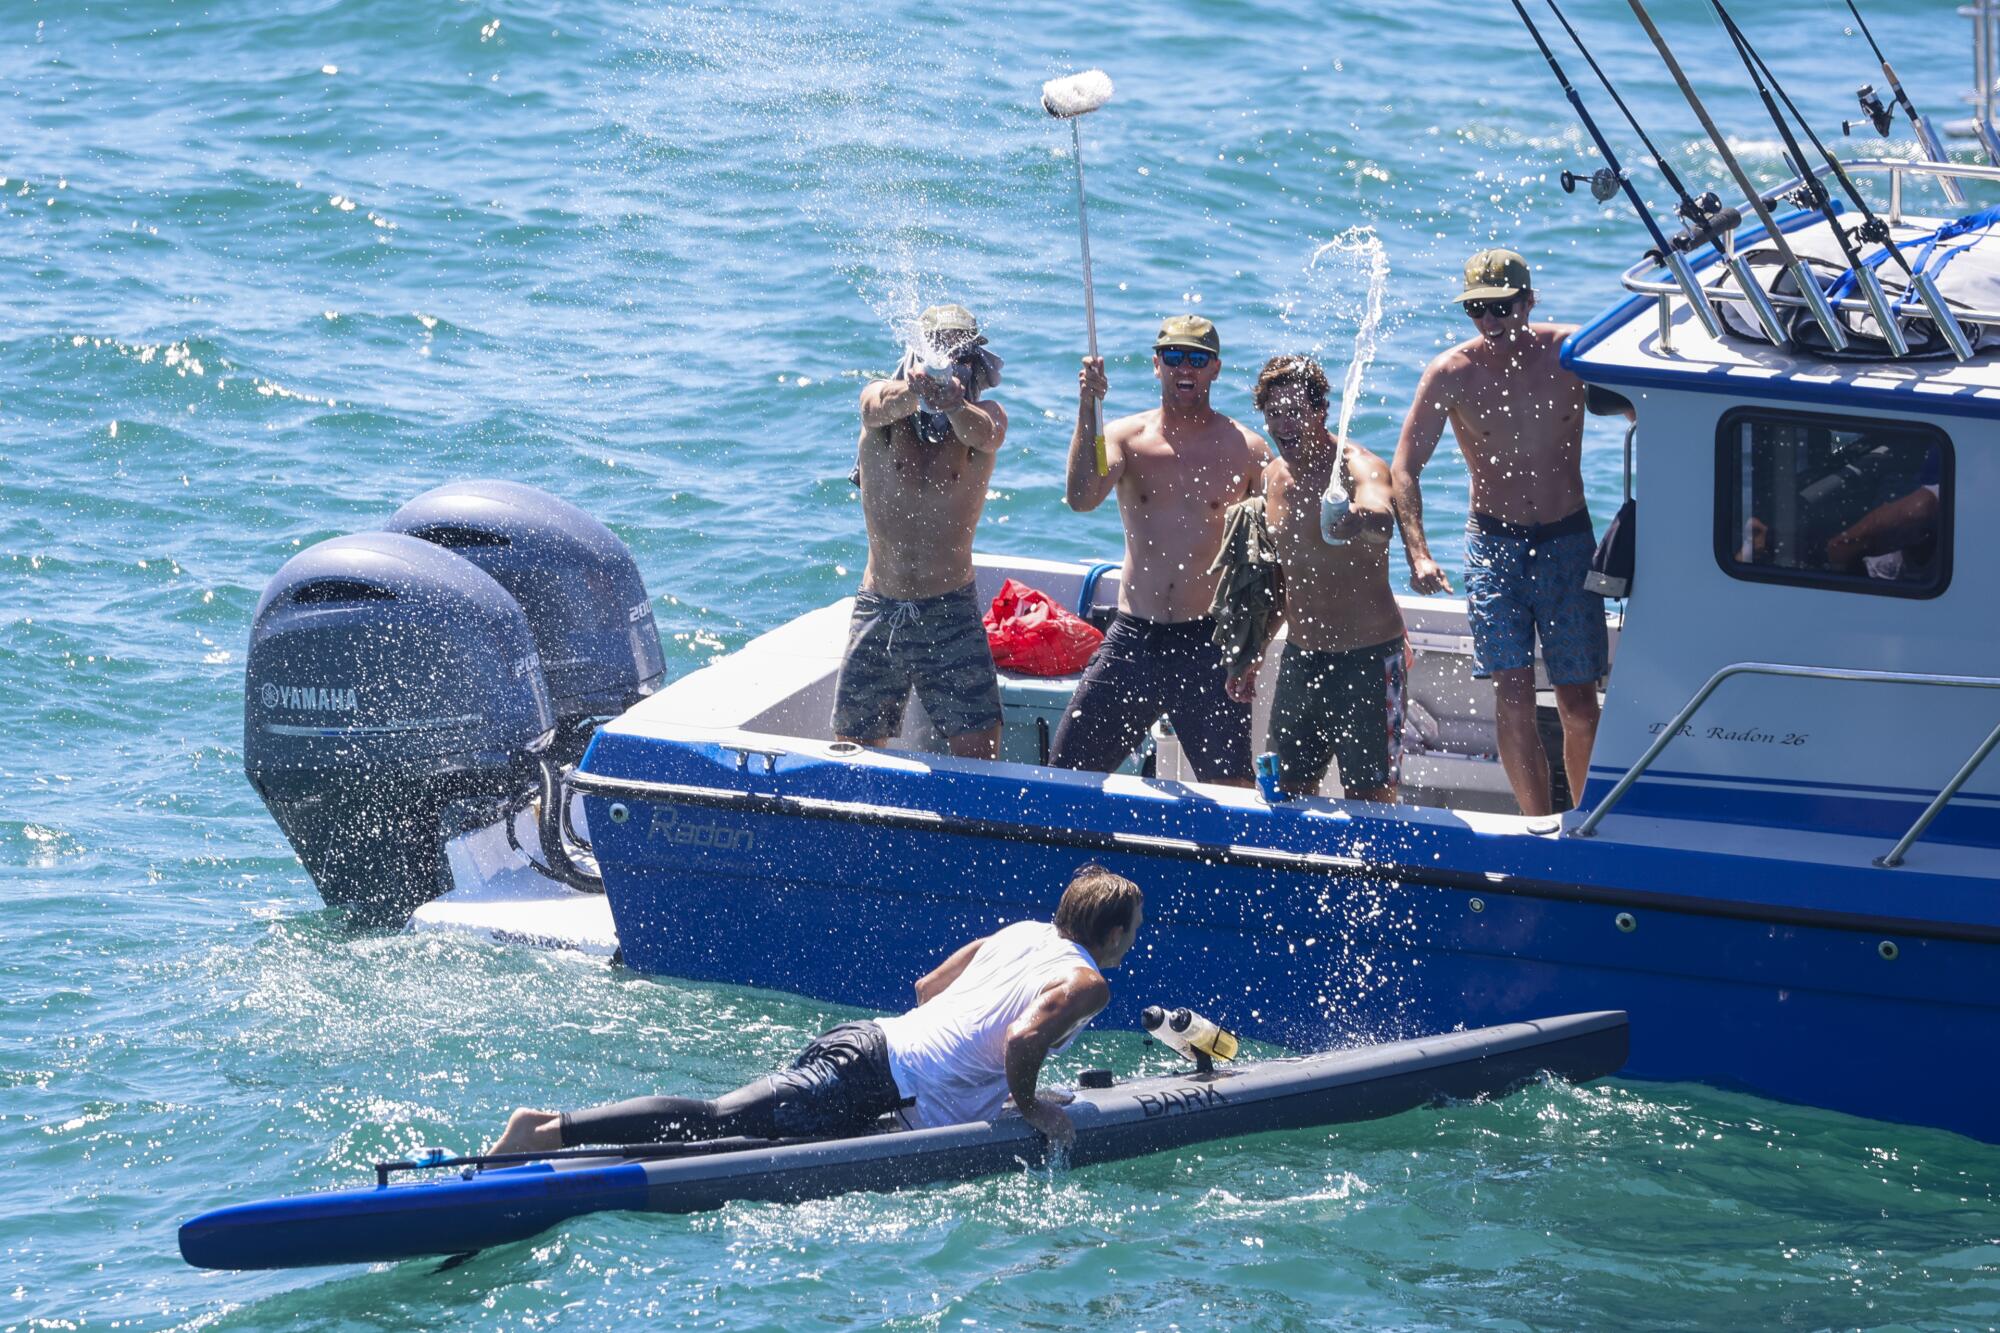 Jake Miller on his paddleboard, is congratulated by his team on a boat